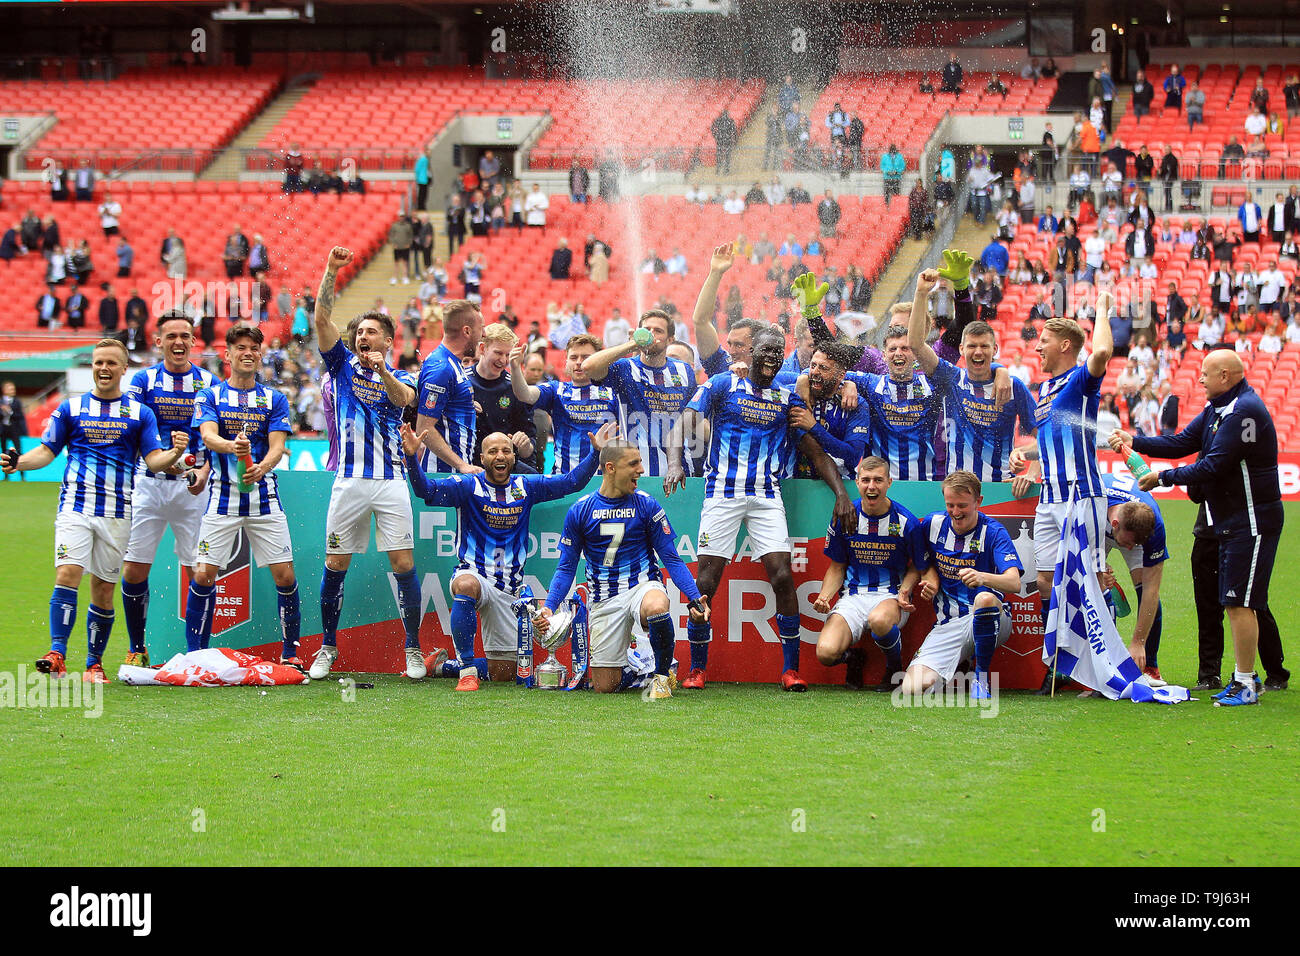 London, UK. 19th May, 2019. Chertsey Town players celebrate their FA Vase  Trophy victory. The FA Vase trophy final, Chertsey Town FC v Cray Valley at  Wembley Stadium in London on Sunday